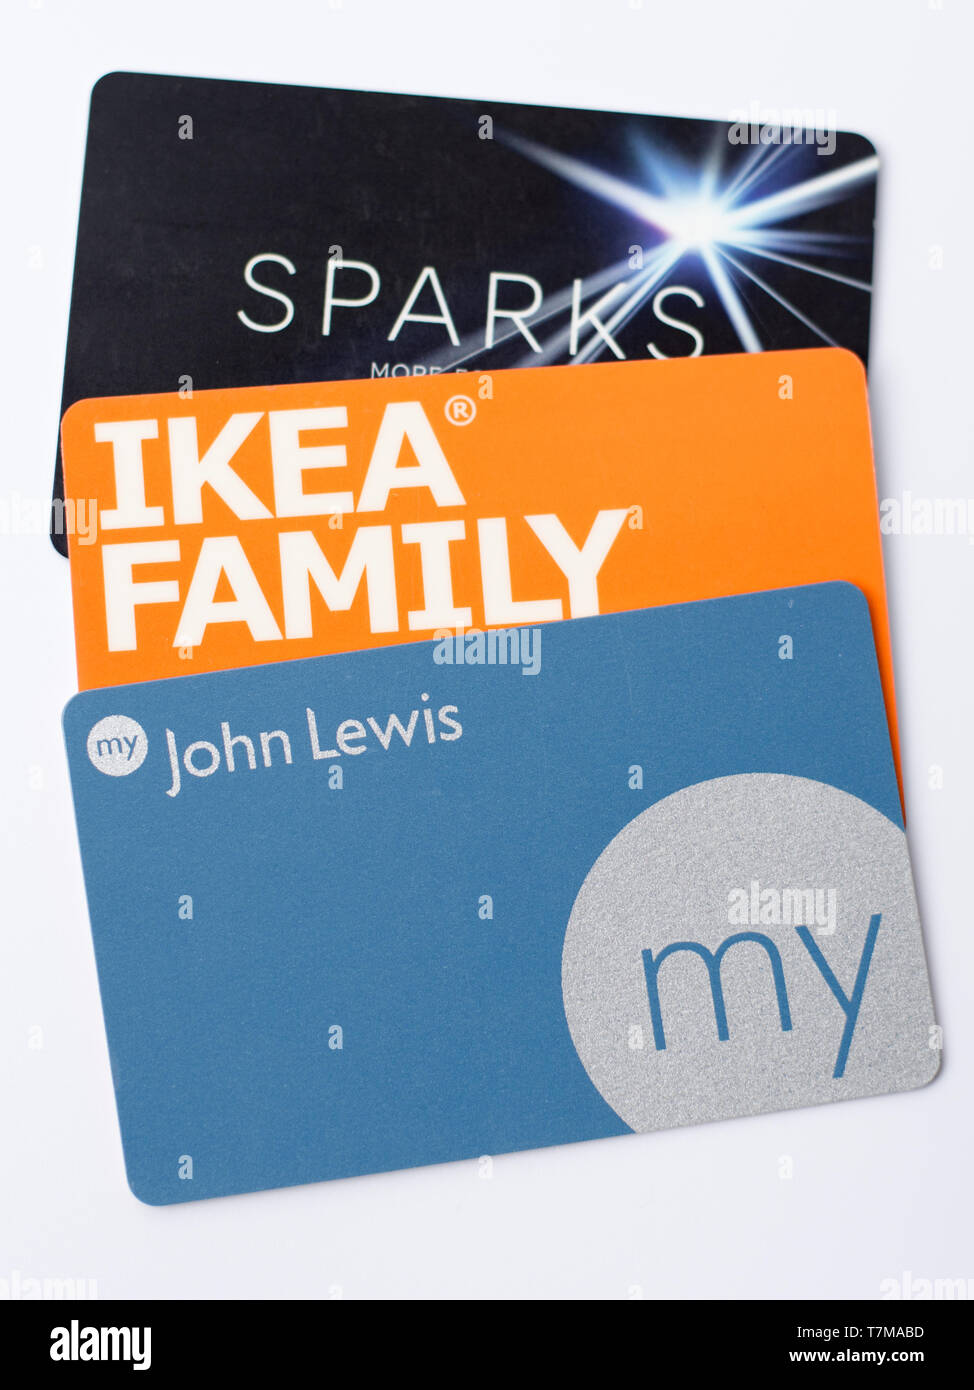 Loyalty Card - M&S Sparks, Ikea family and My John Lewis Stock Photo